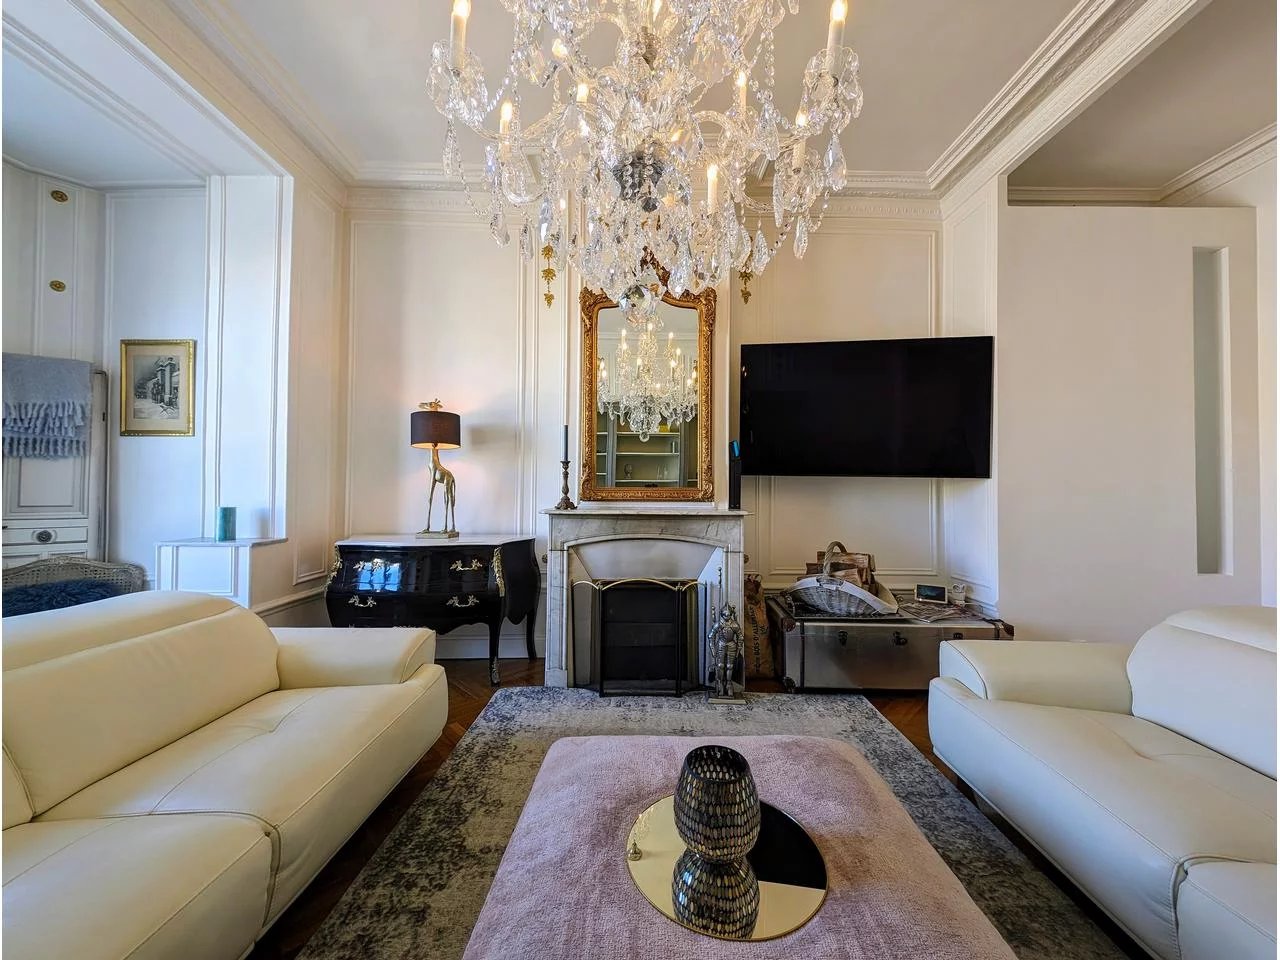 Appartement  4 Rooms 111m2  for sale   699 000 €